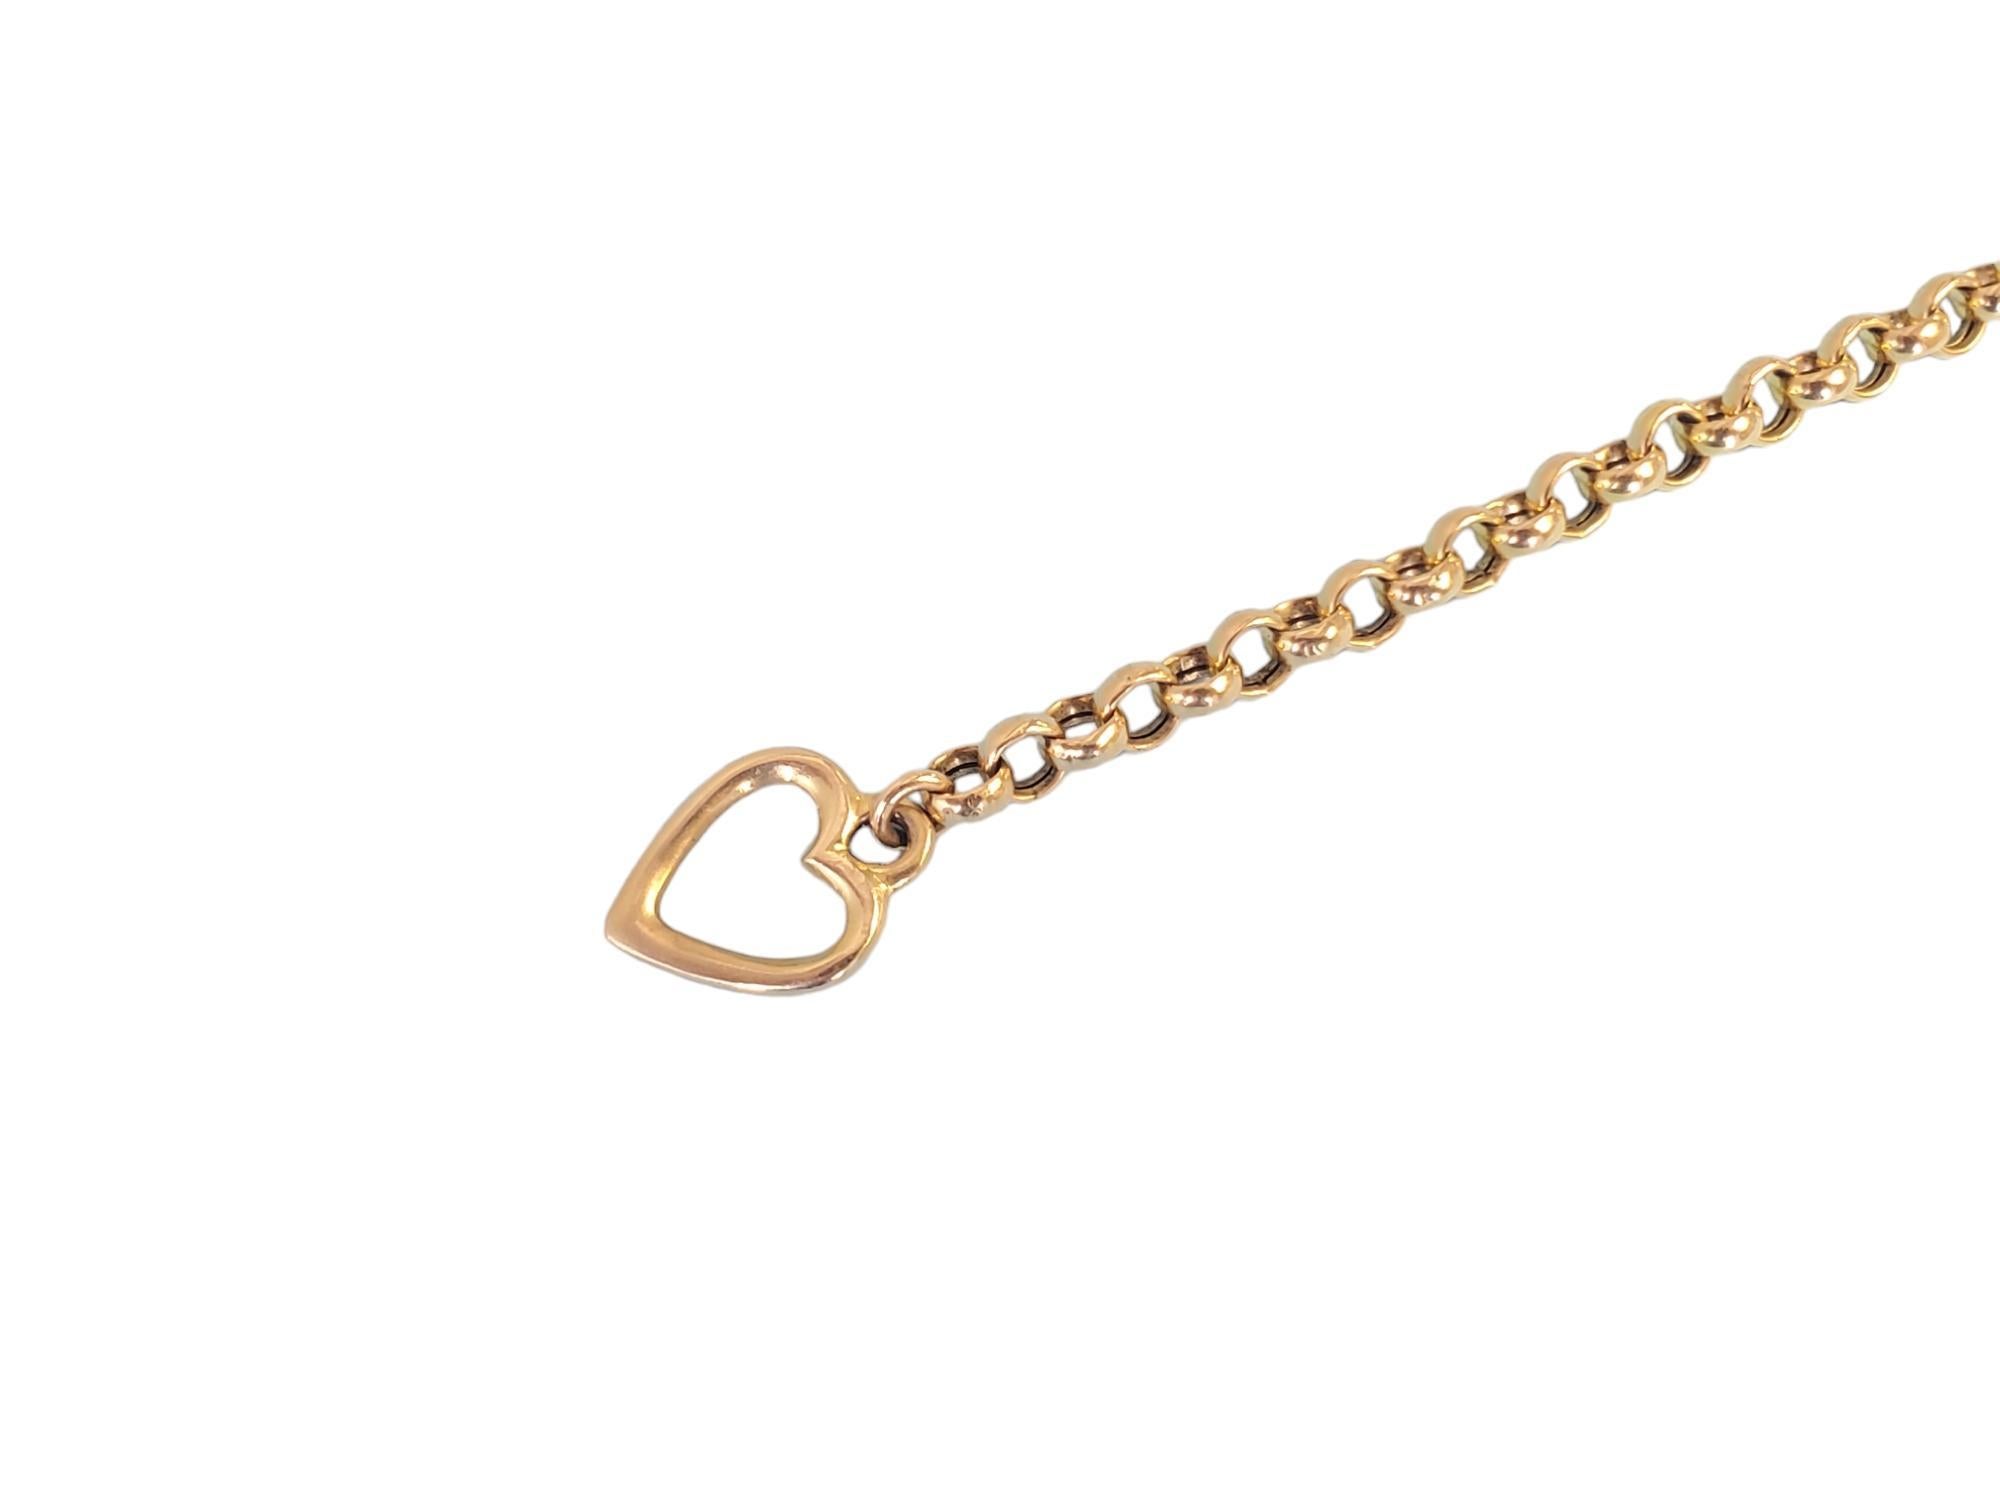 Estate 14k Toggle Bracelet Yellow Gold Link Chain with Heart Lock In Good Condition For Sale In Overland Park, KS